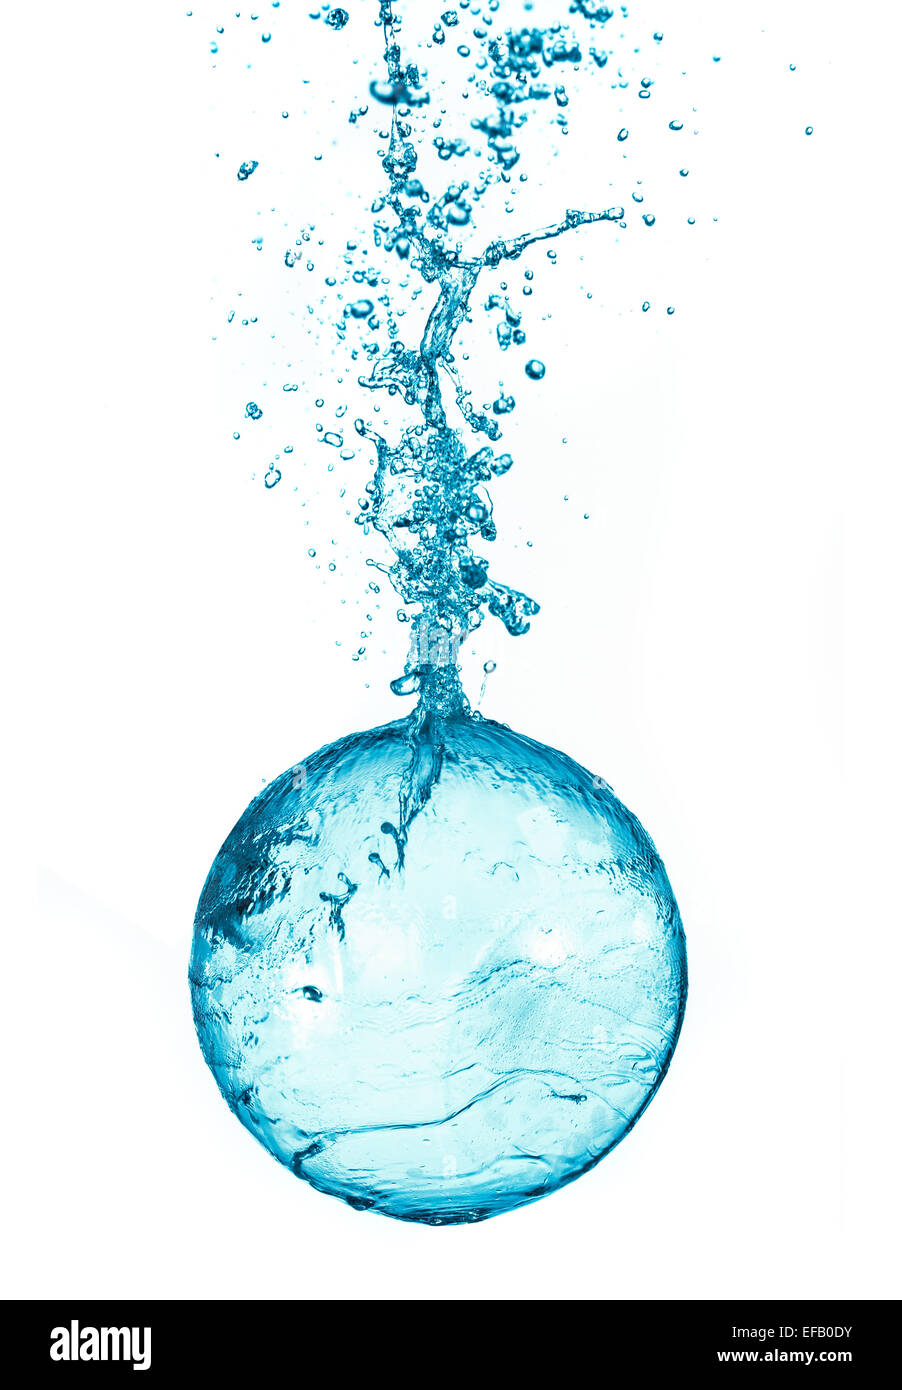 Abstract water ball splash isolated on white background. Stock Photo